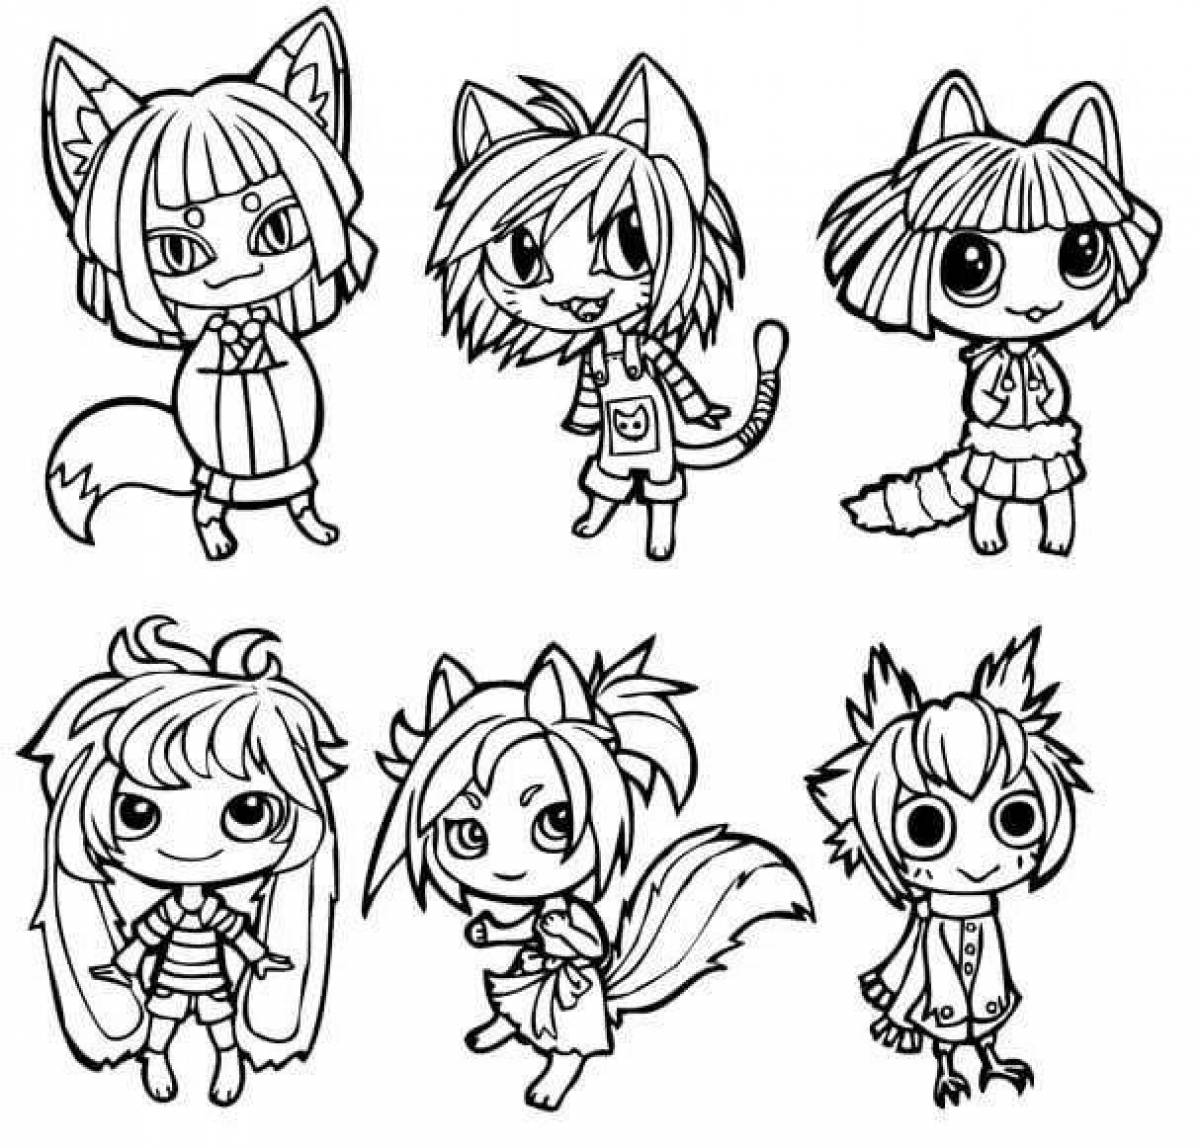 Hip hop anime sticker coloring page